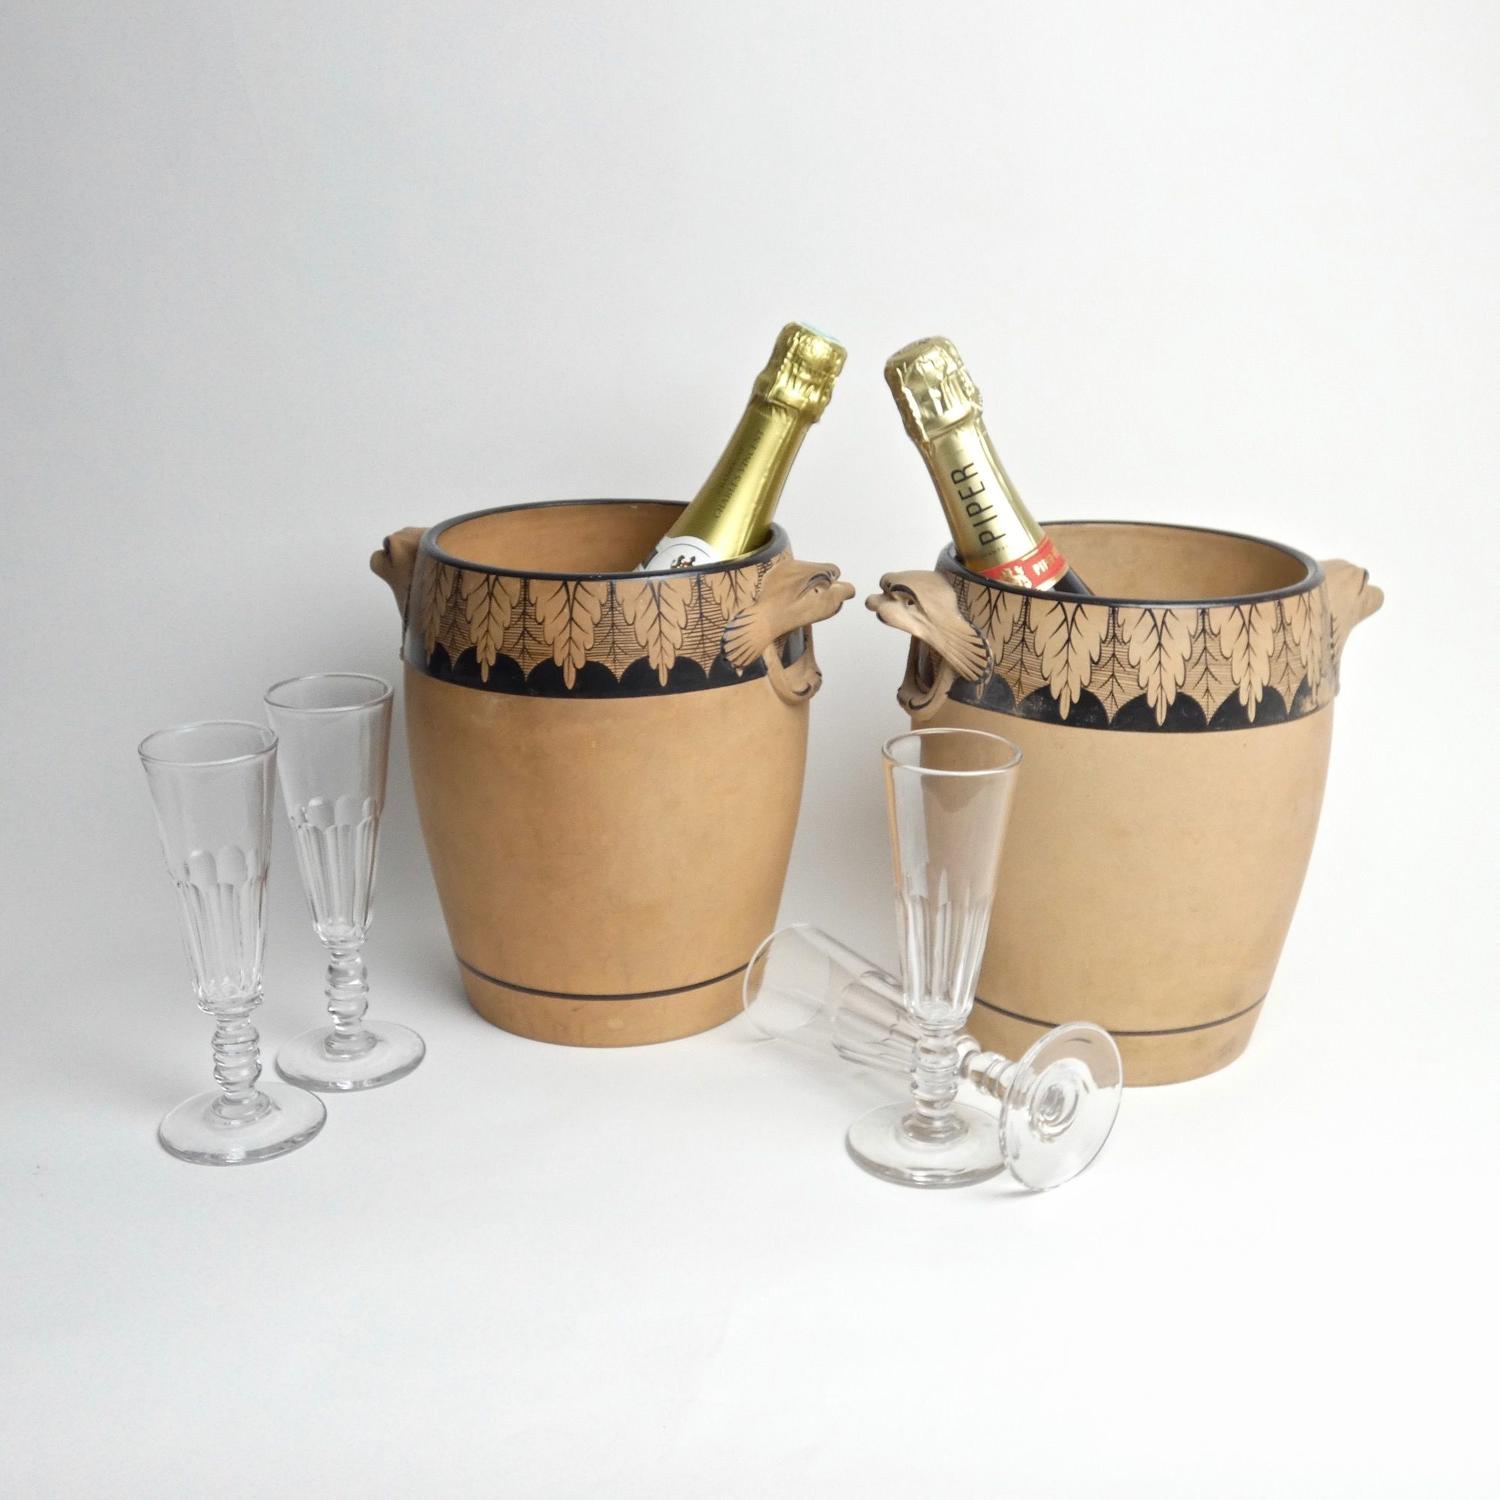 Pair of Davenport champagne coolers